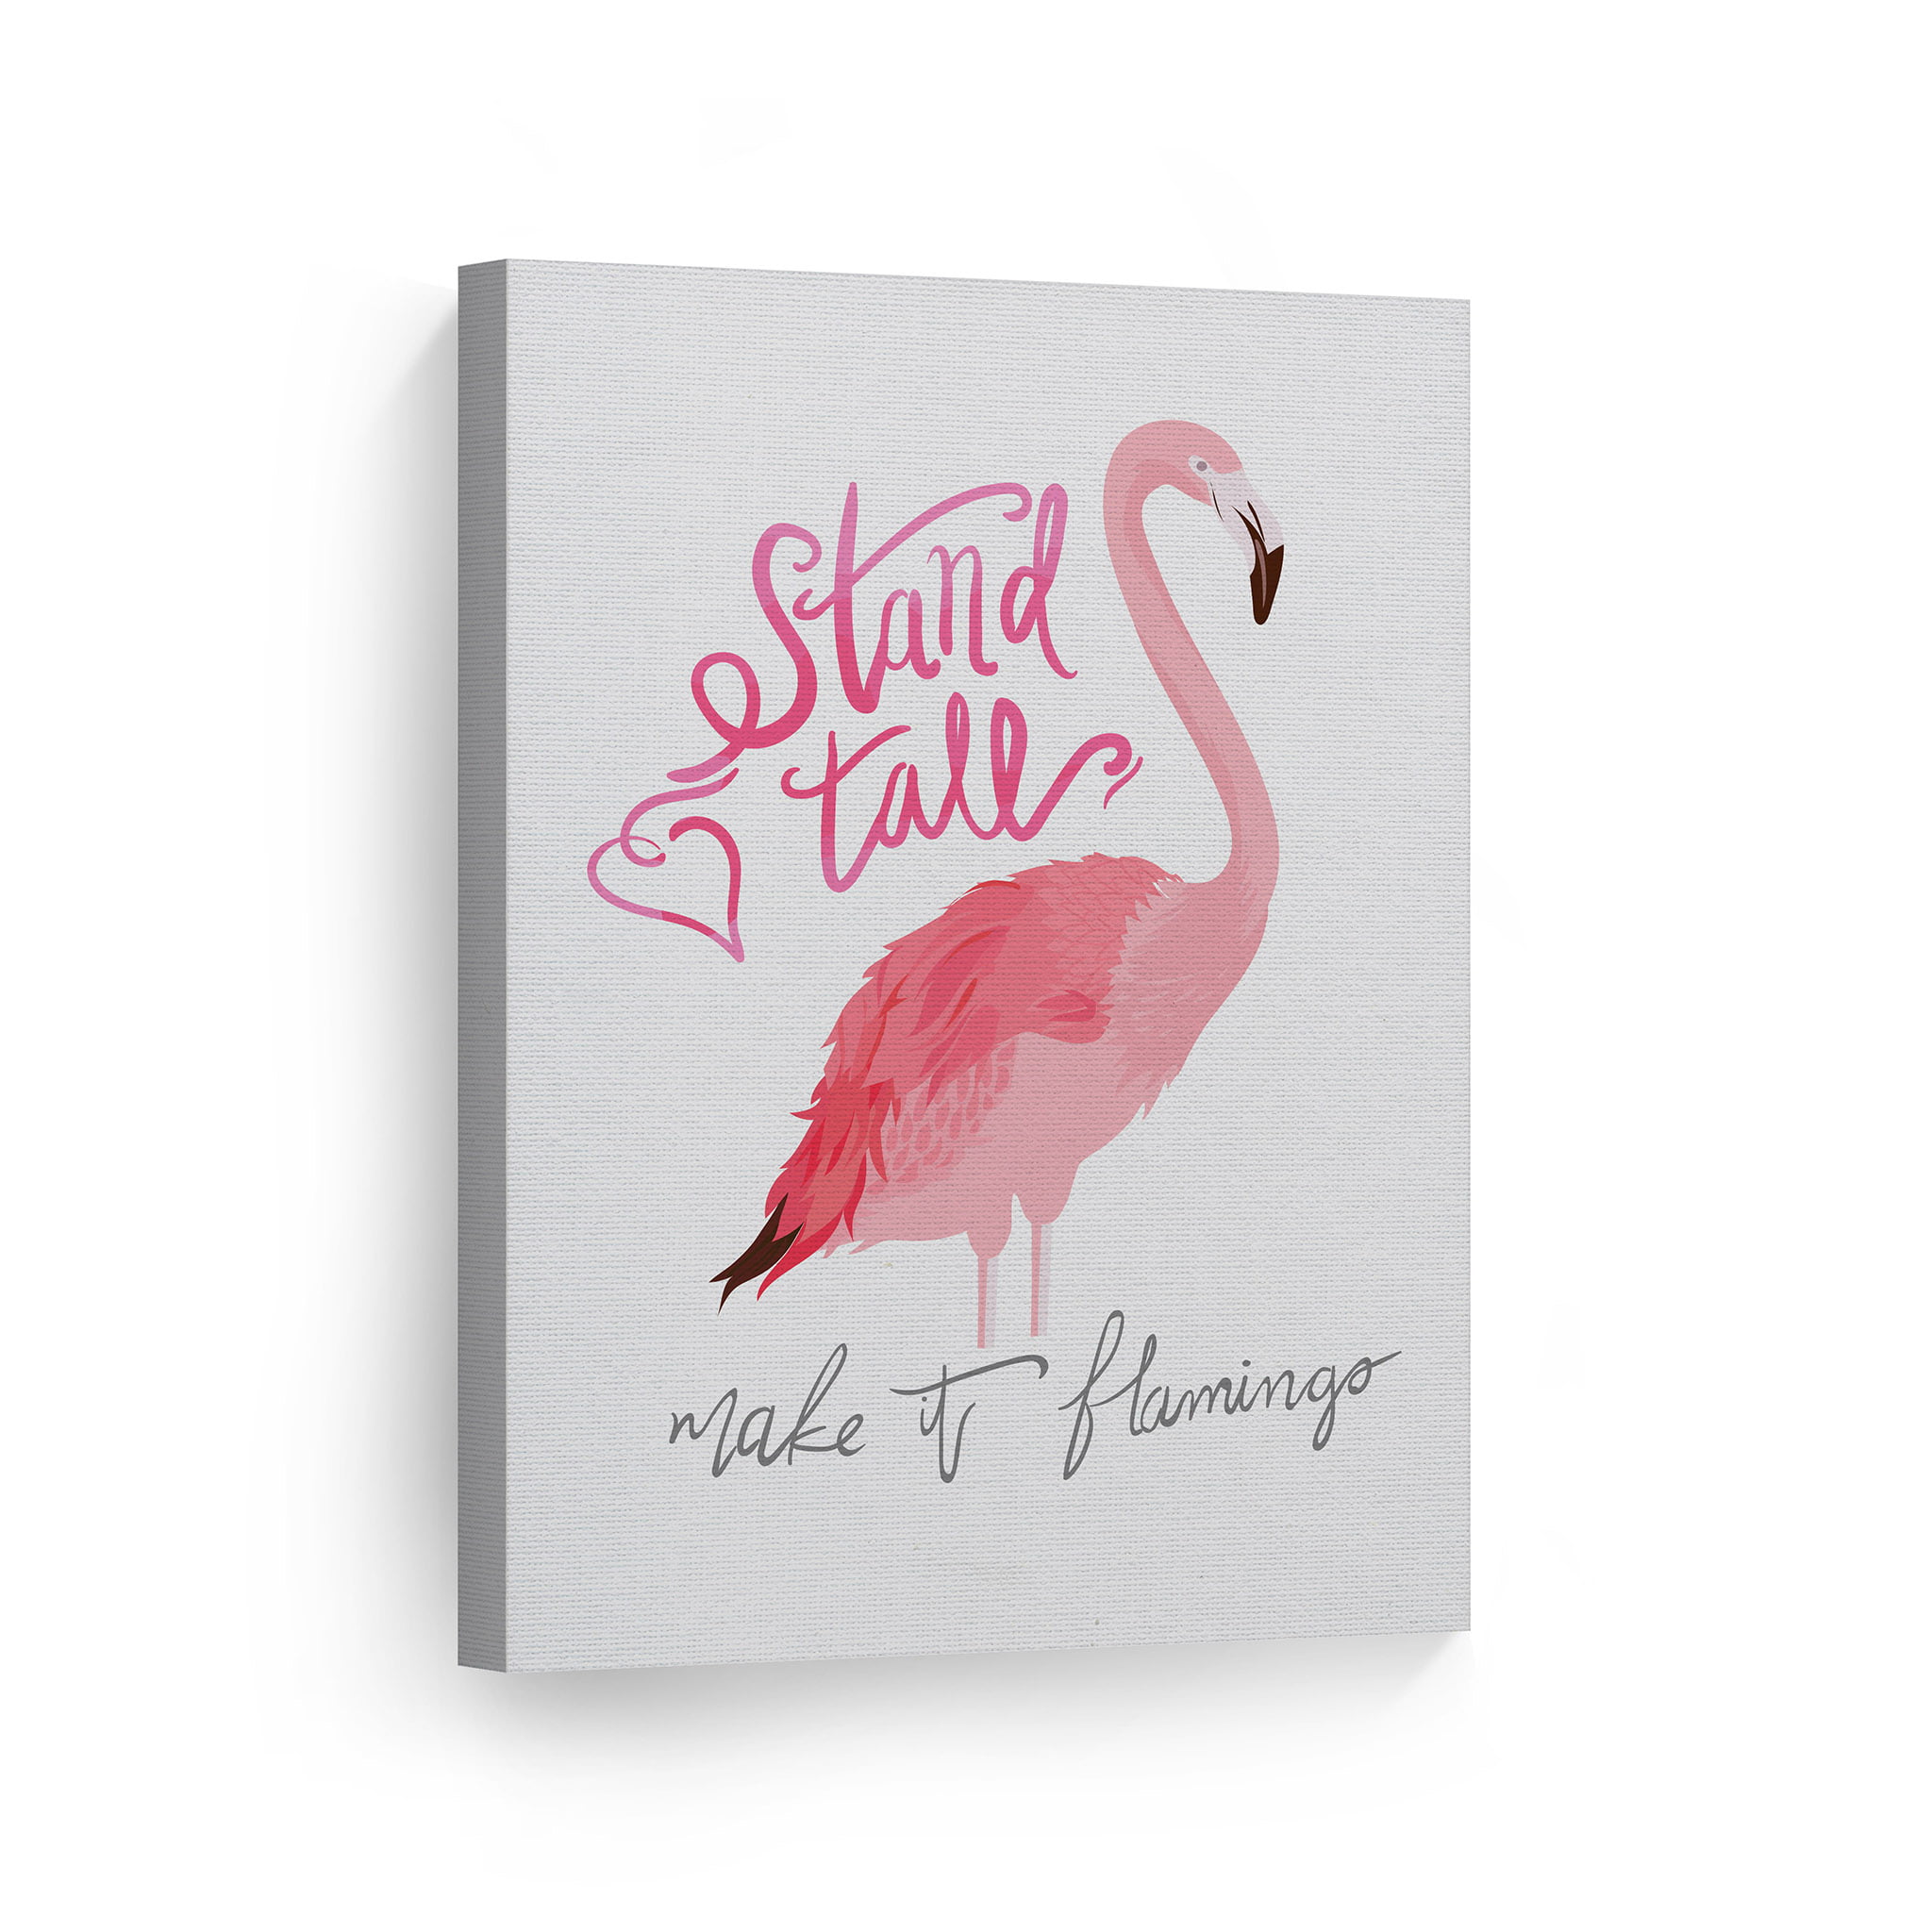 Smile Art Design Stand Tall Quote Flamingo Decor White Background Canvas Wall Art Print Kids Room Decor Baby Room Decor Nursery Decor Ready To Hang Made In The Usa 28x19 Walmart Com